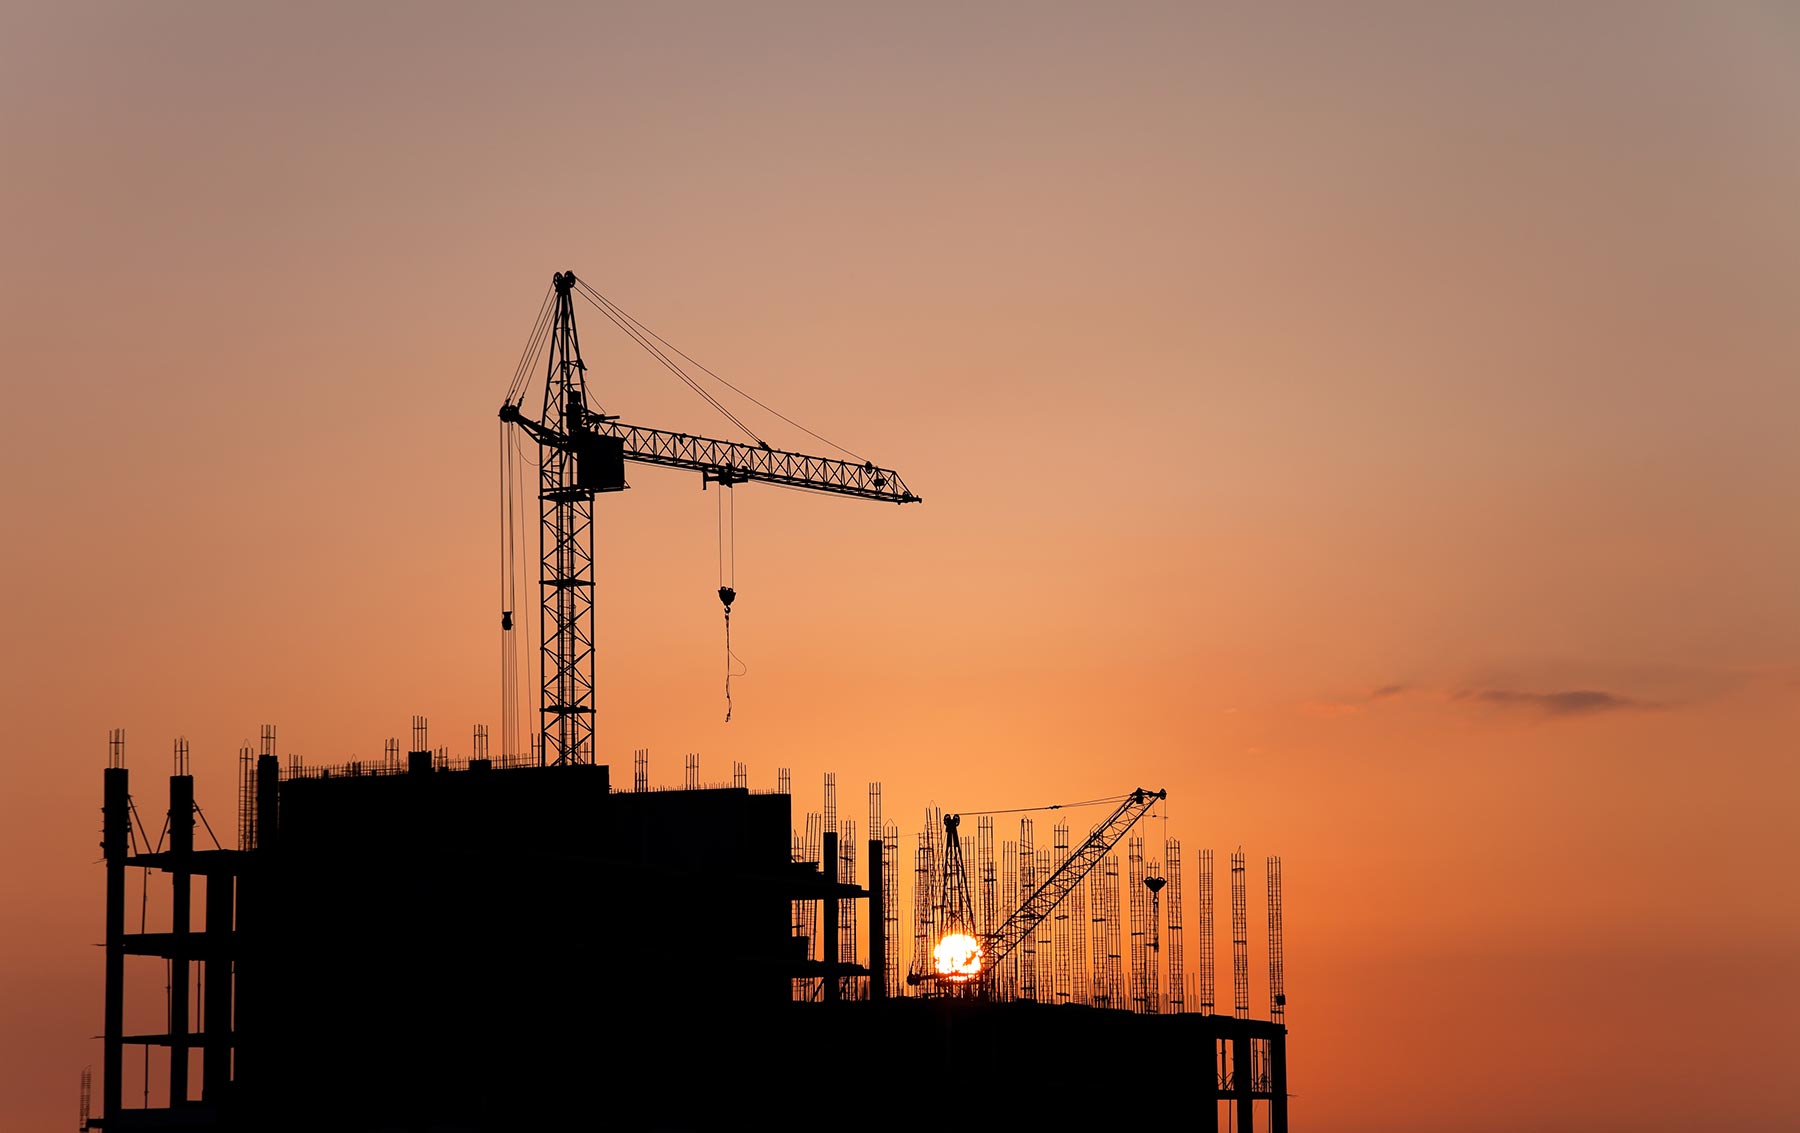 construction-cranes-and-concrete-structure-at-suns-PBLEVC8.jpg